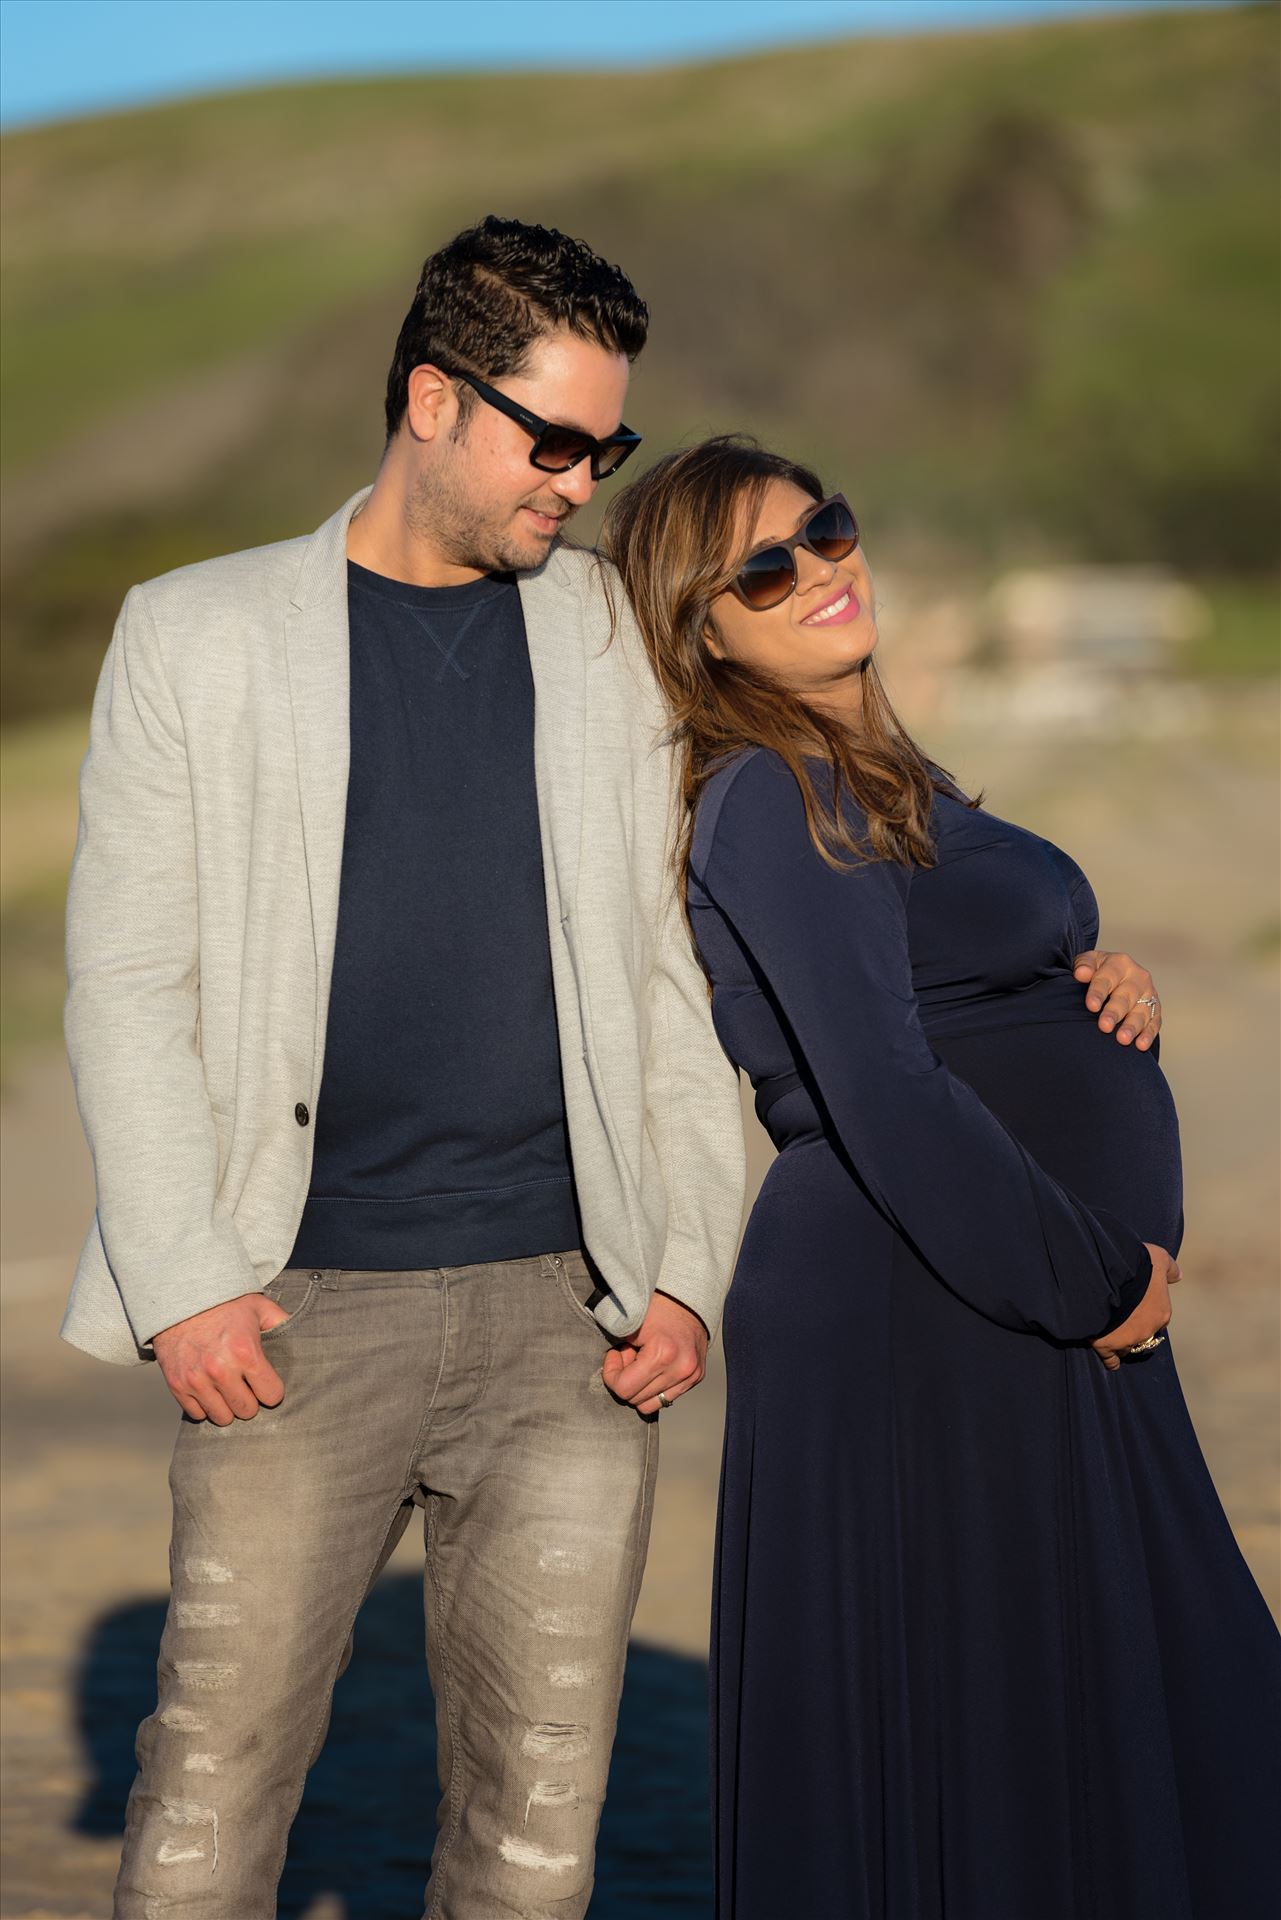 Siddiki Maternity Session 03  by Sarah Williams